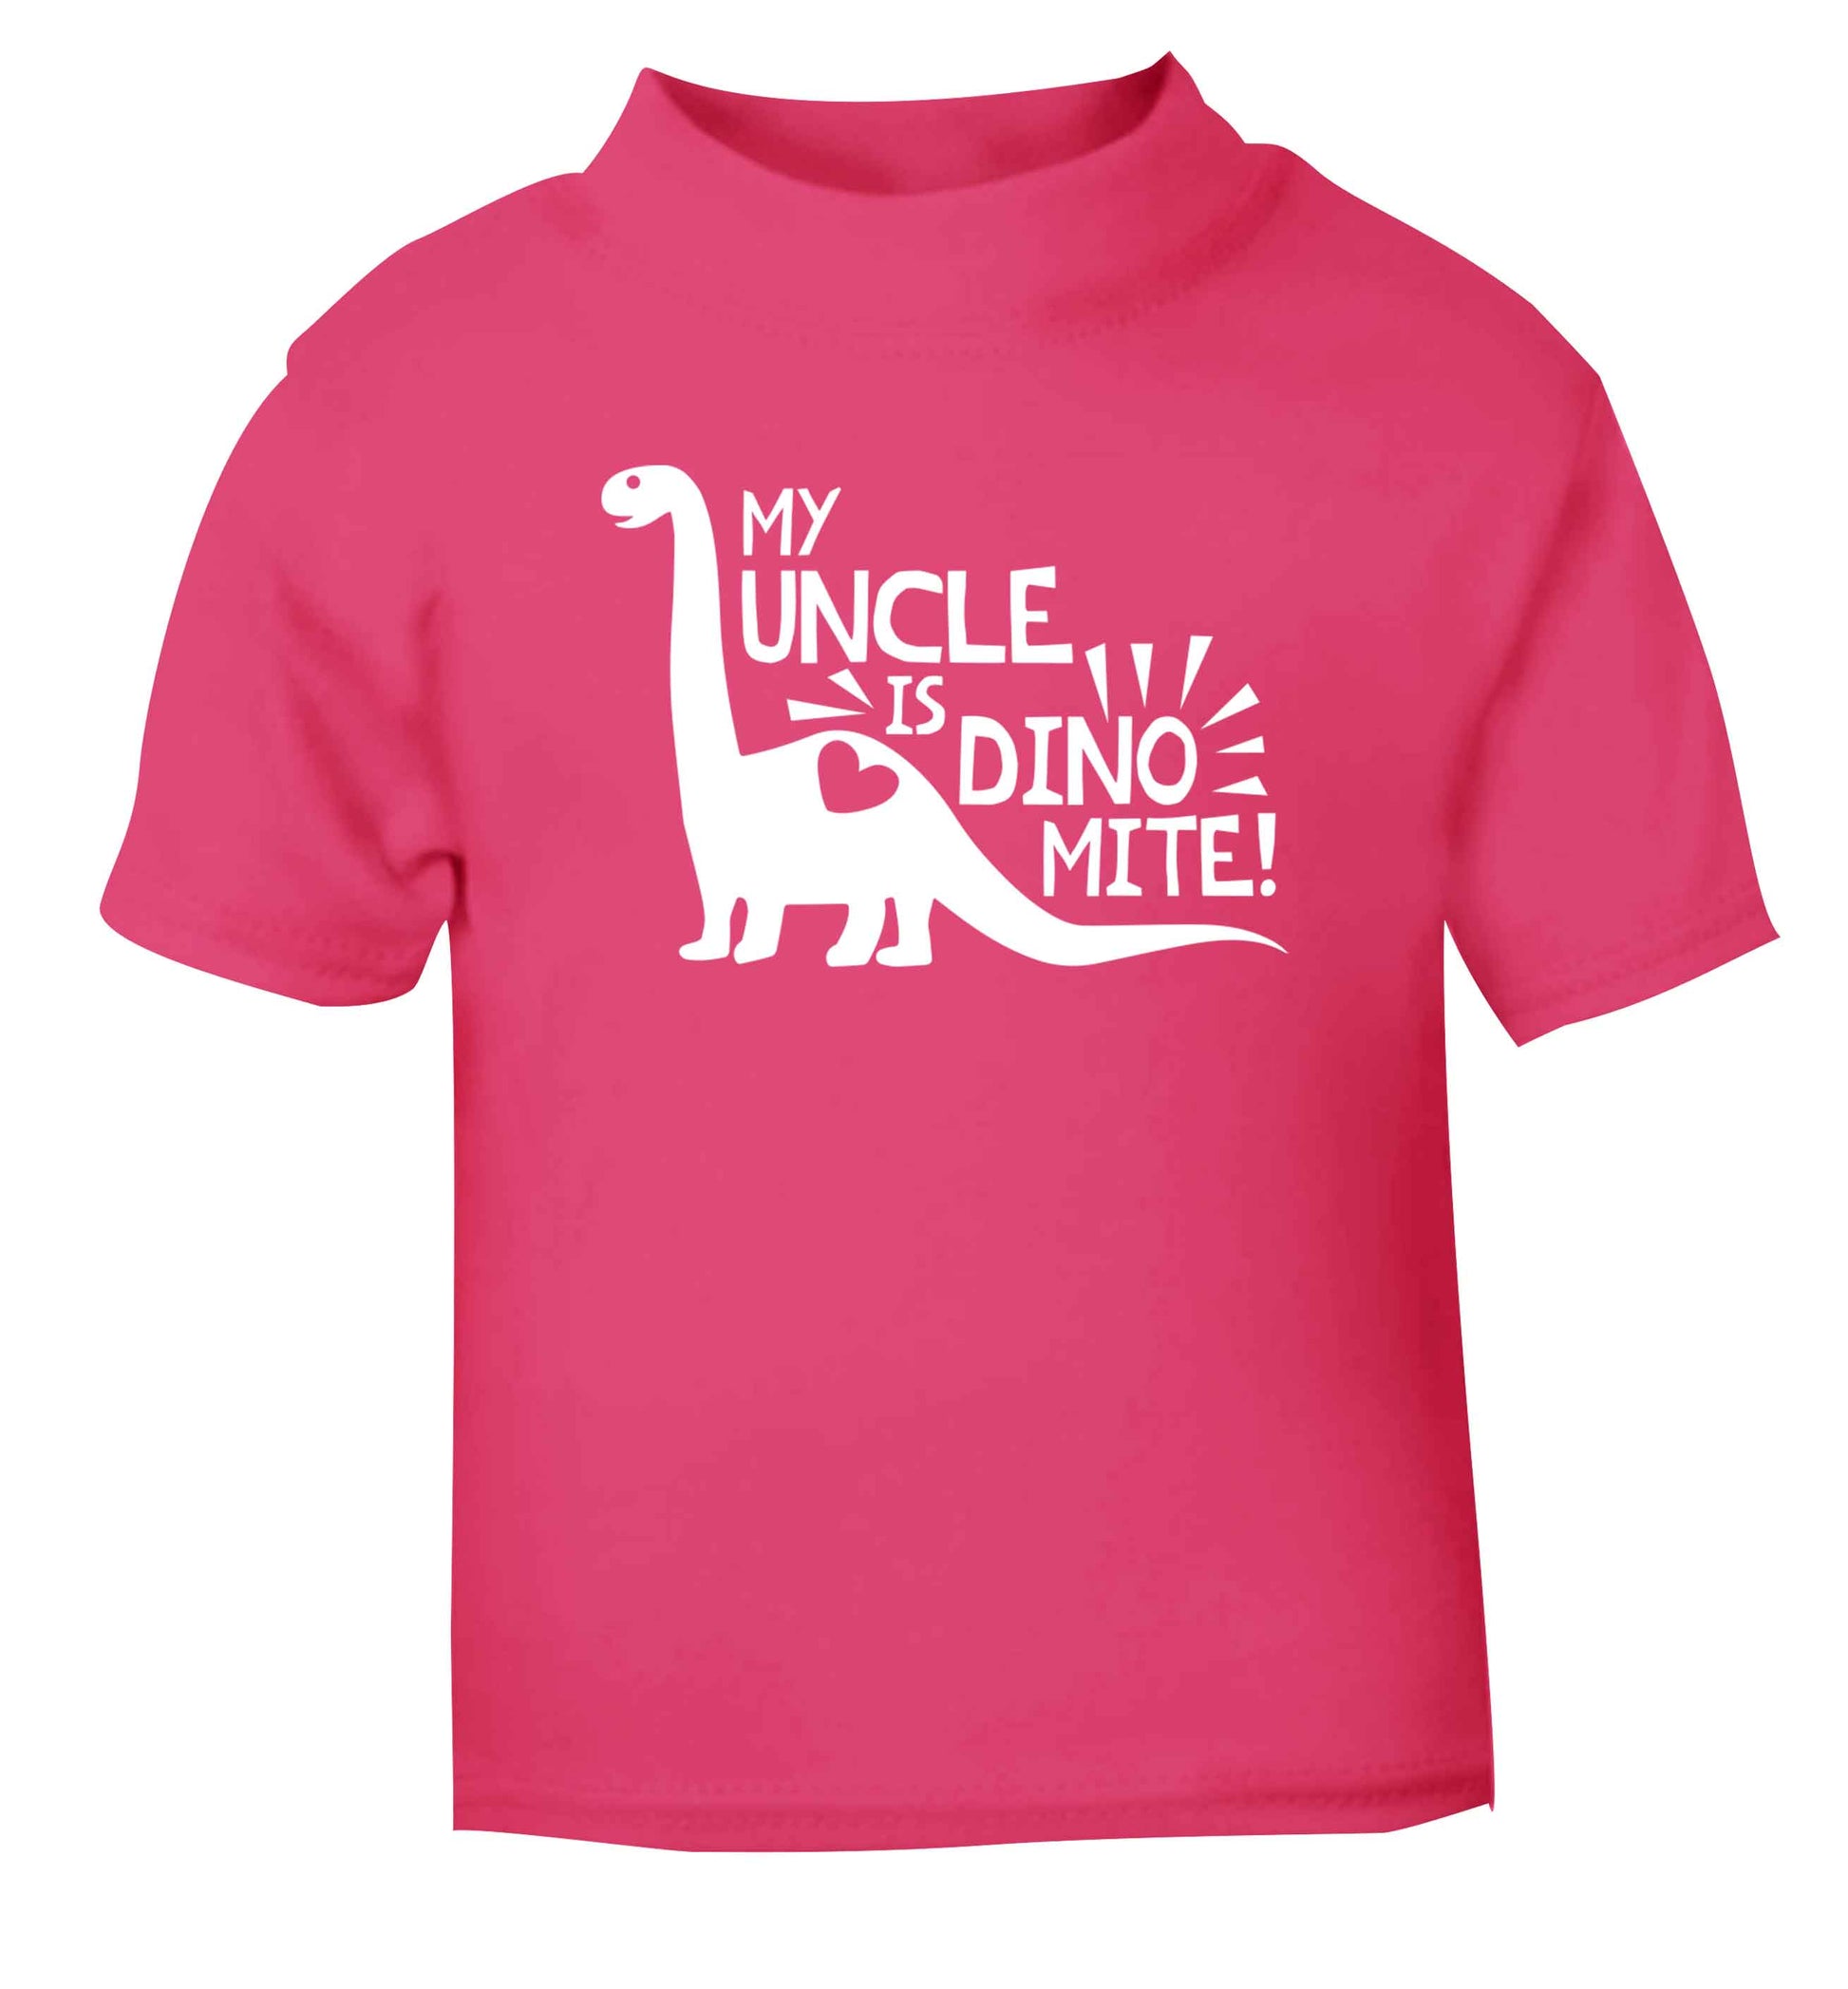 My uncle is dinomite! pink Baby Toddler Tshirt 2 Years